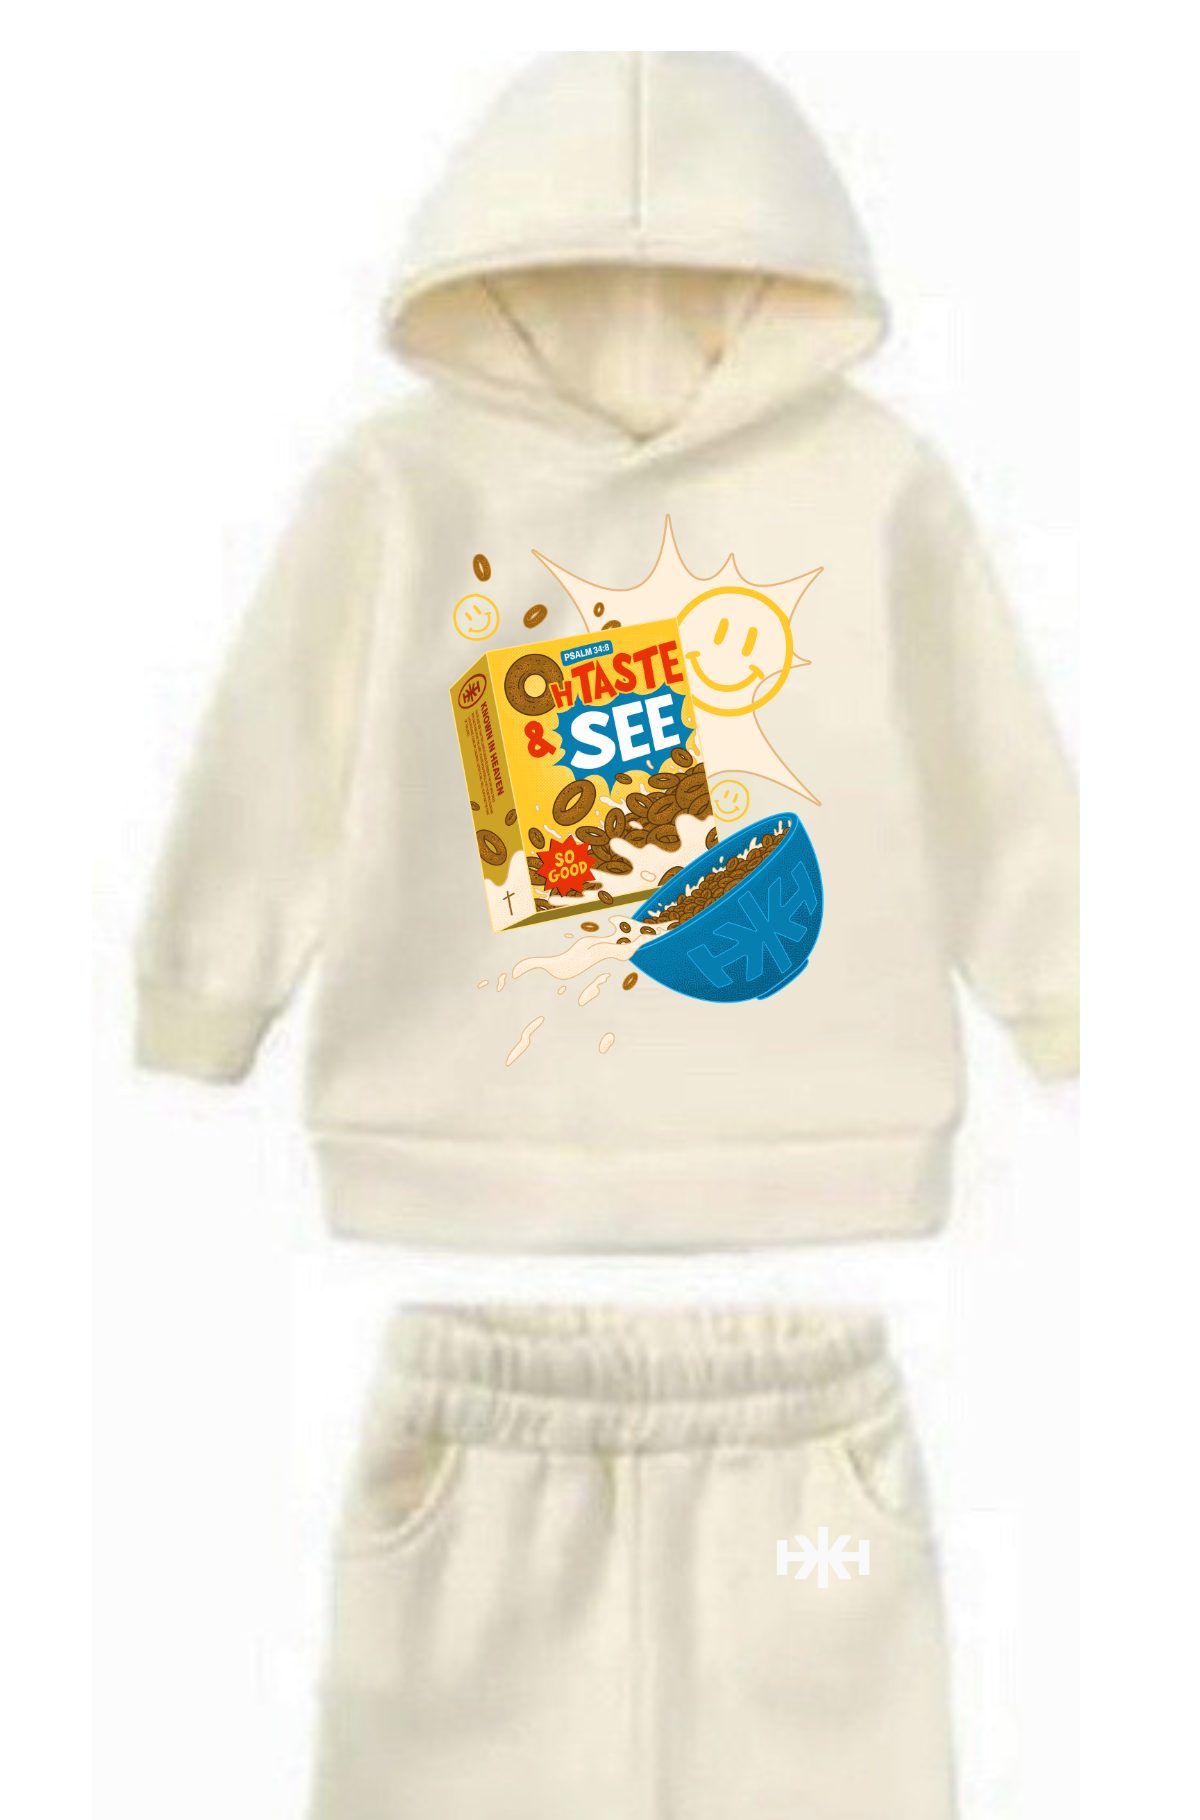 Oh Taste & See (Cereal Edition) - Toddler Sweatsuit